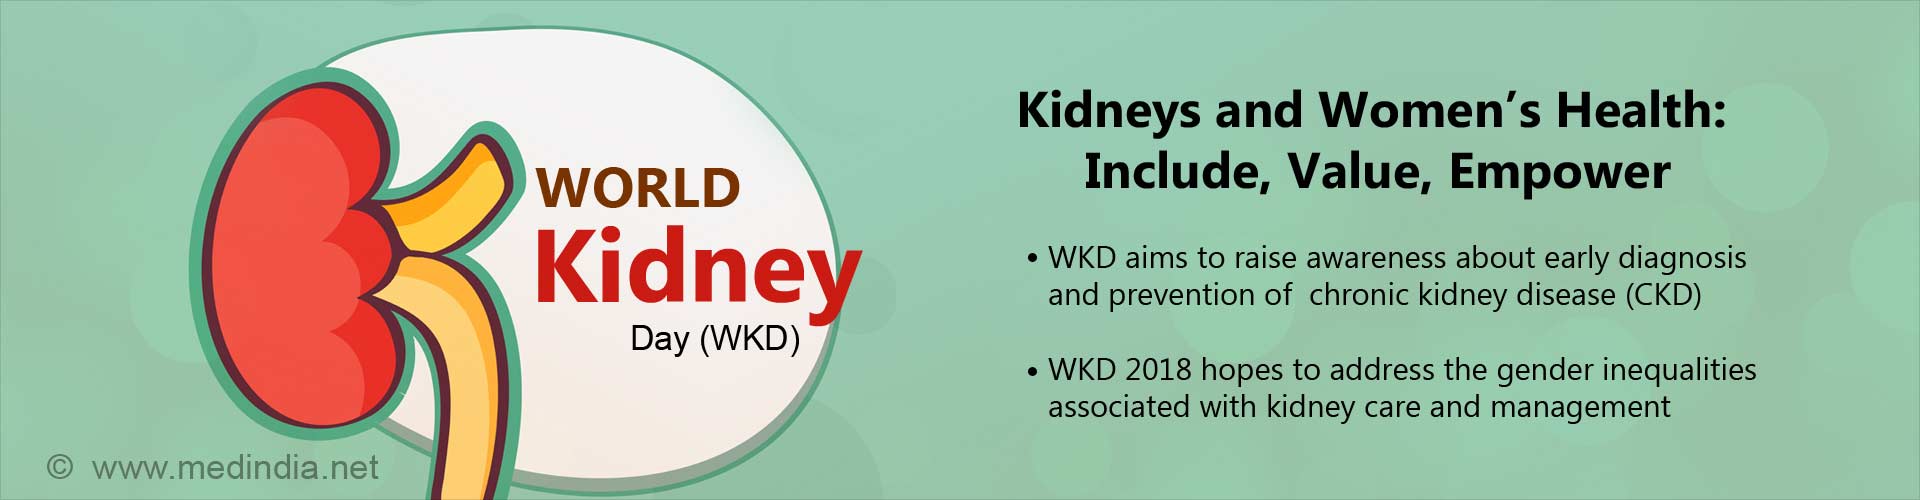 kidneys and women''s health: include, value, empower
- WKD aims to raise awareness about early diagnosis and prevention of chronic kidney disease (CKD)
- WKD 2018 hopes to address the gender inequalities associated with kidney care and management